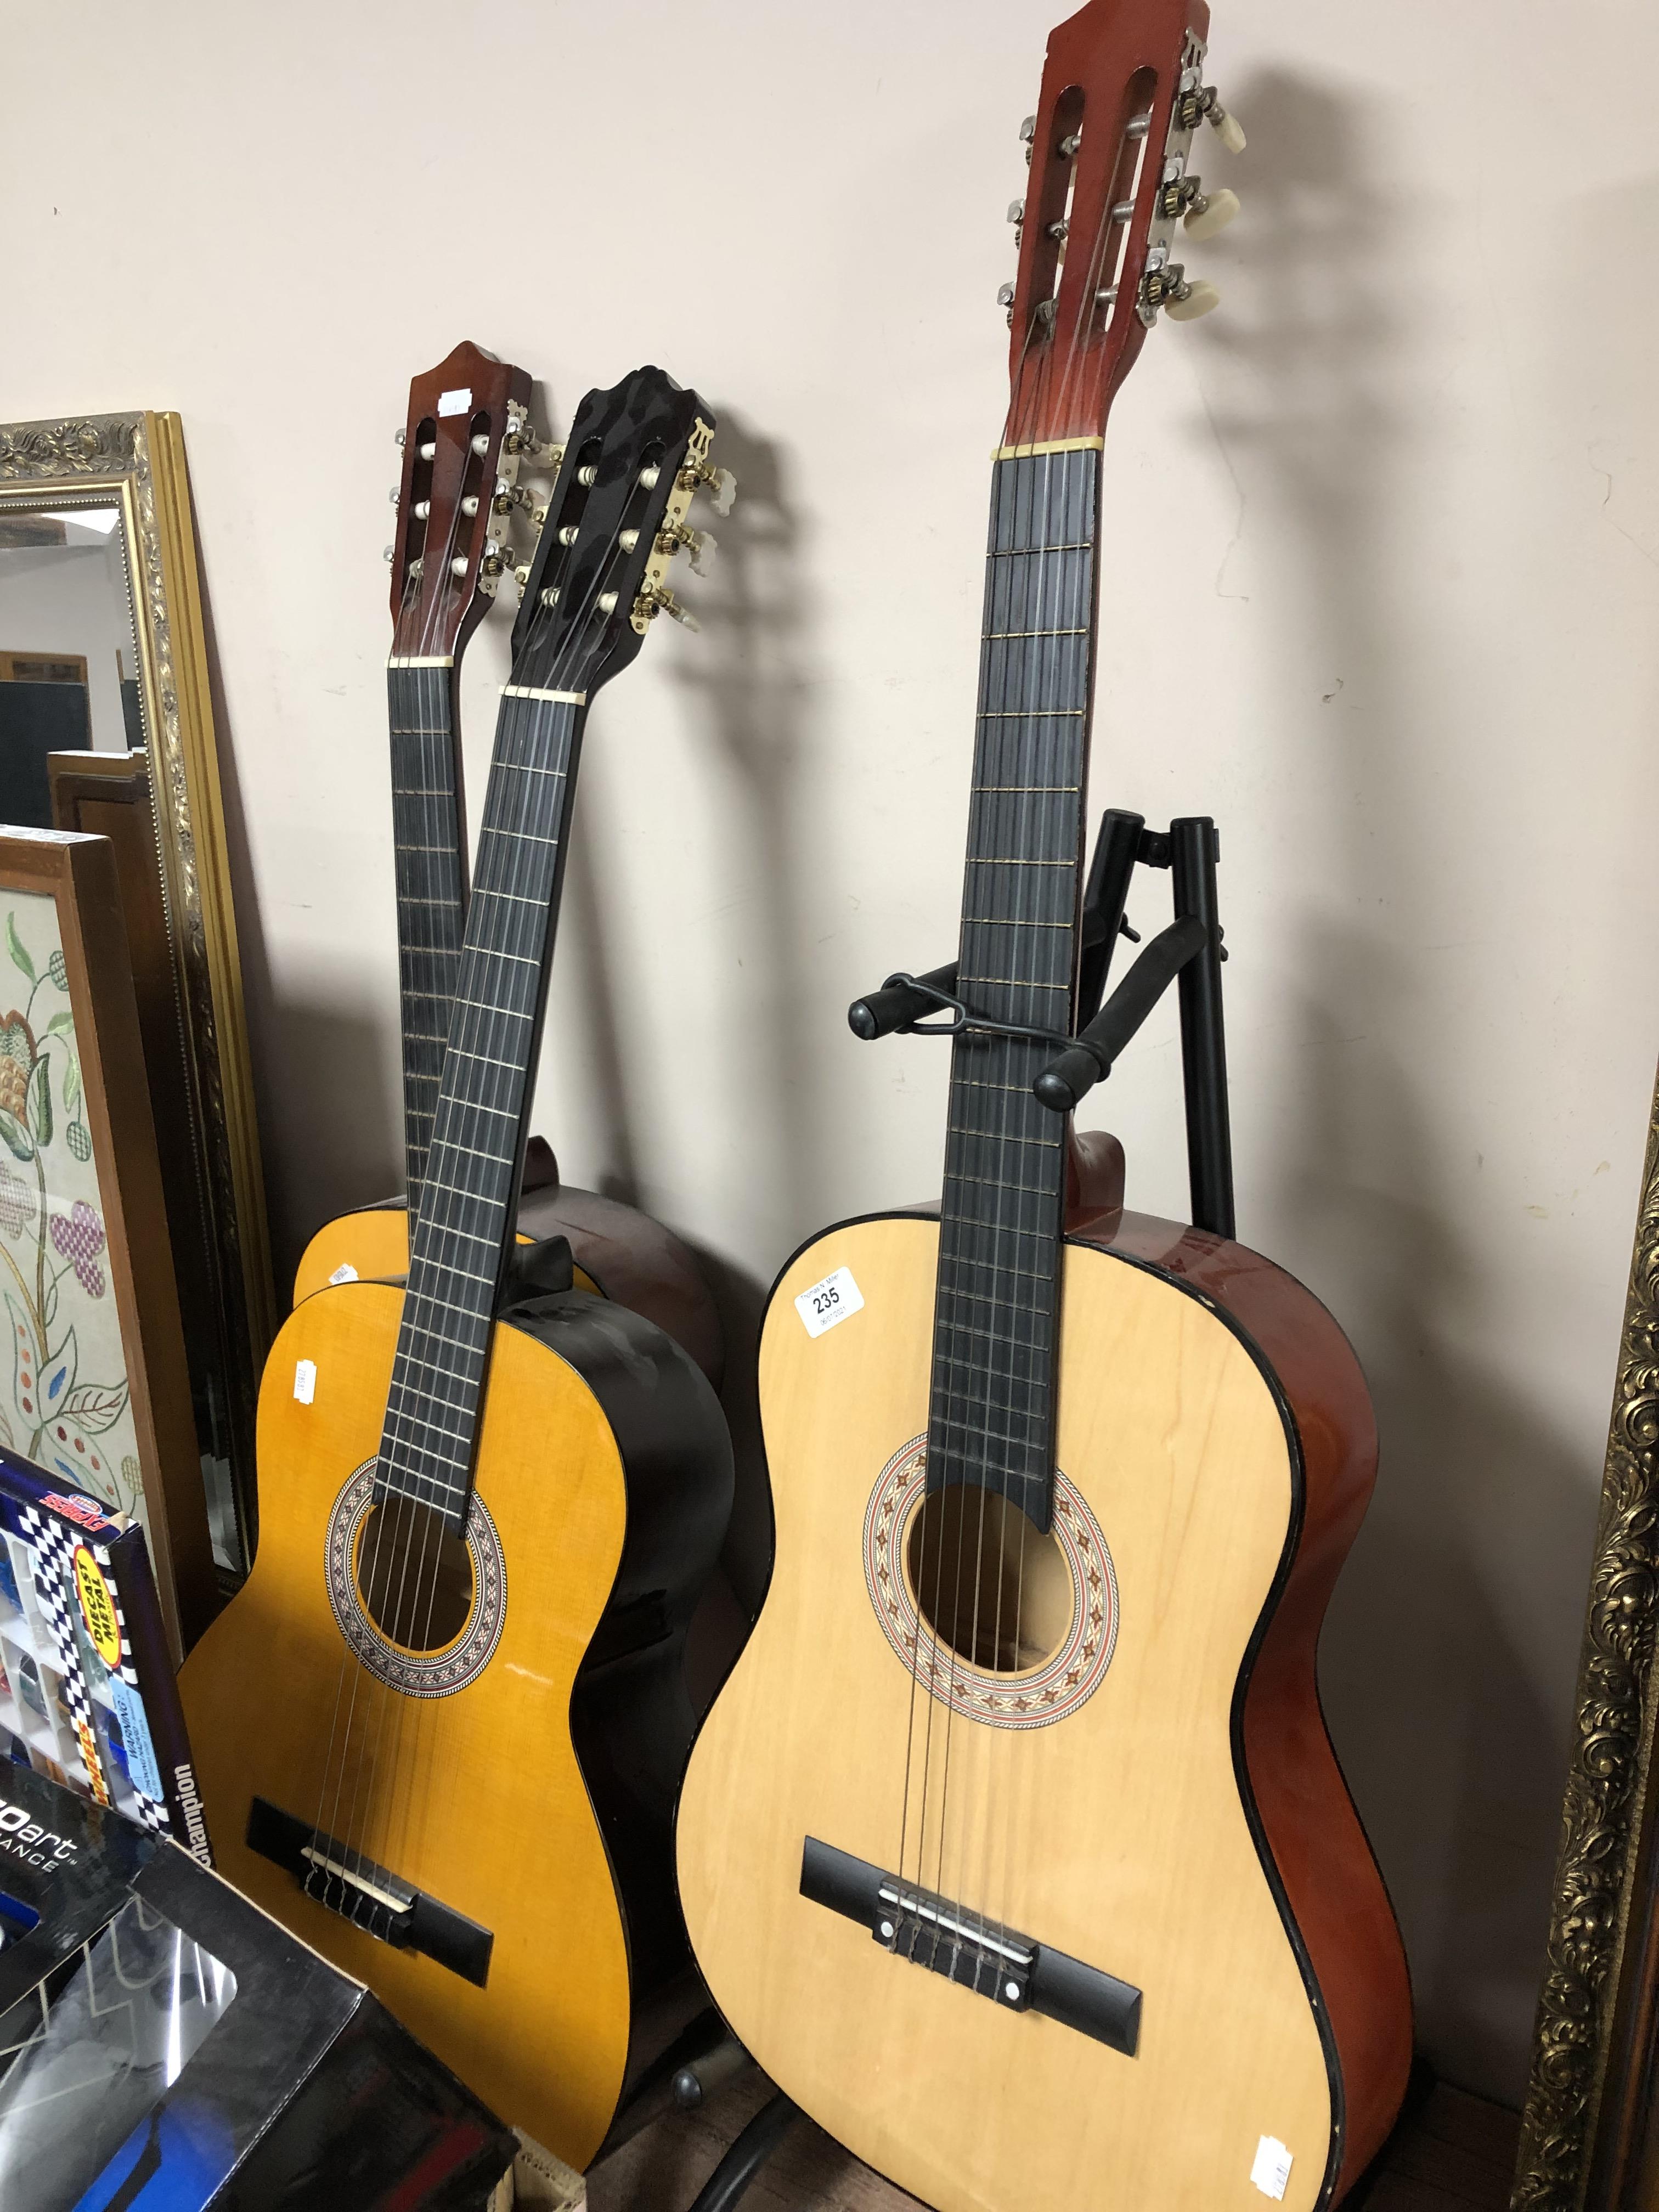 Three classical guitars together with a guitar stand.